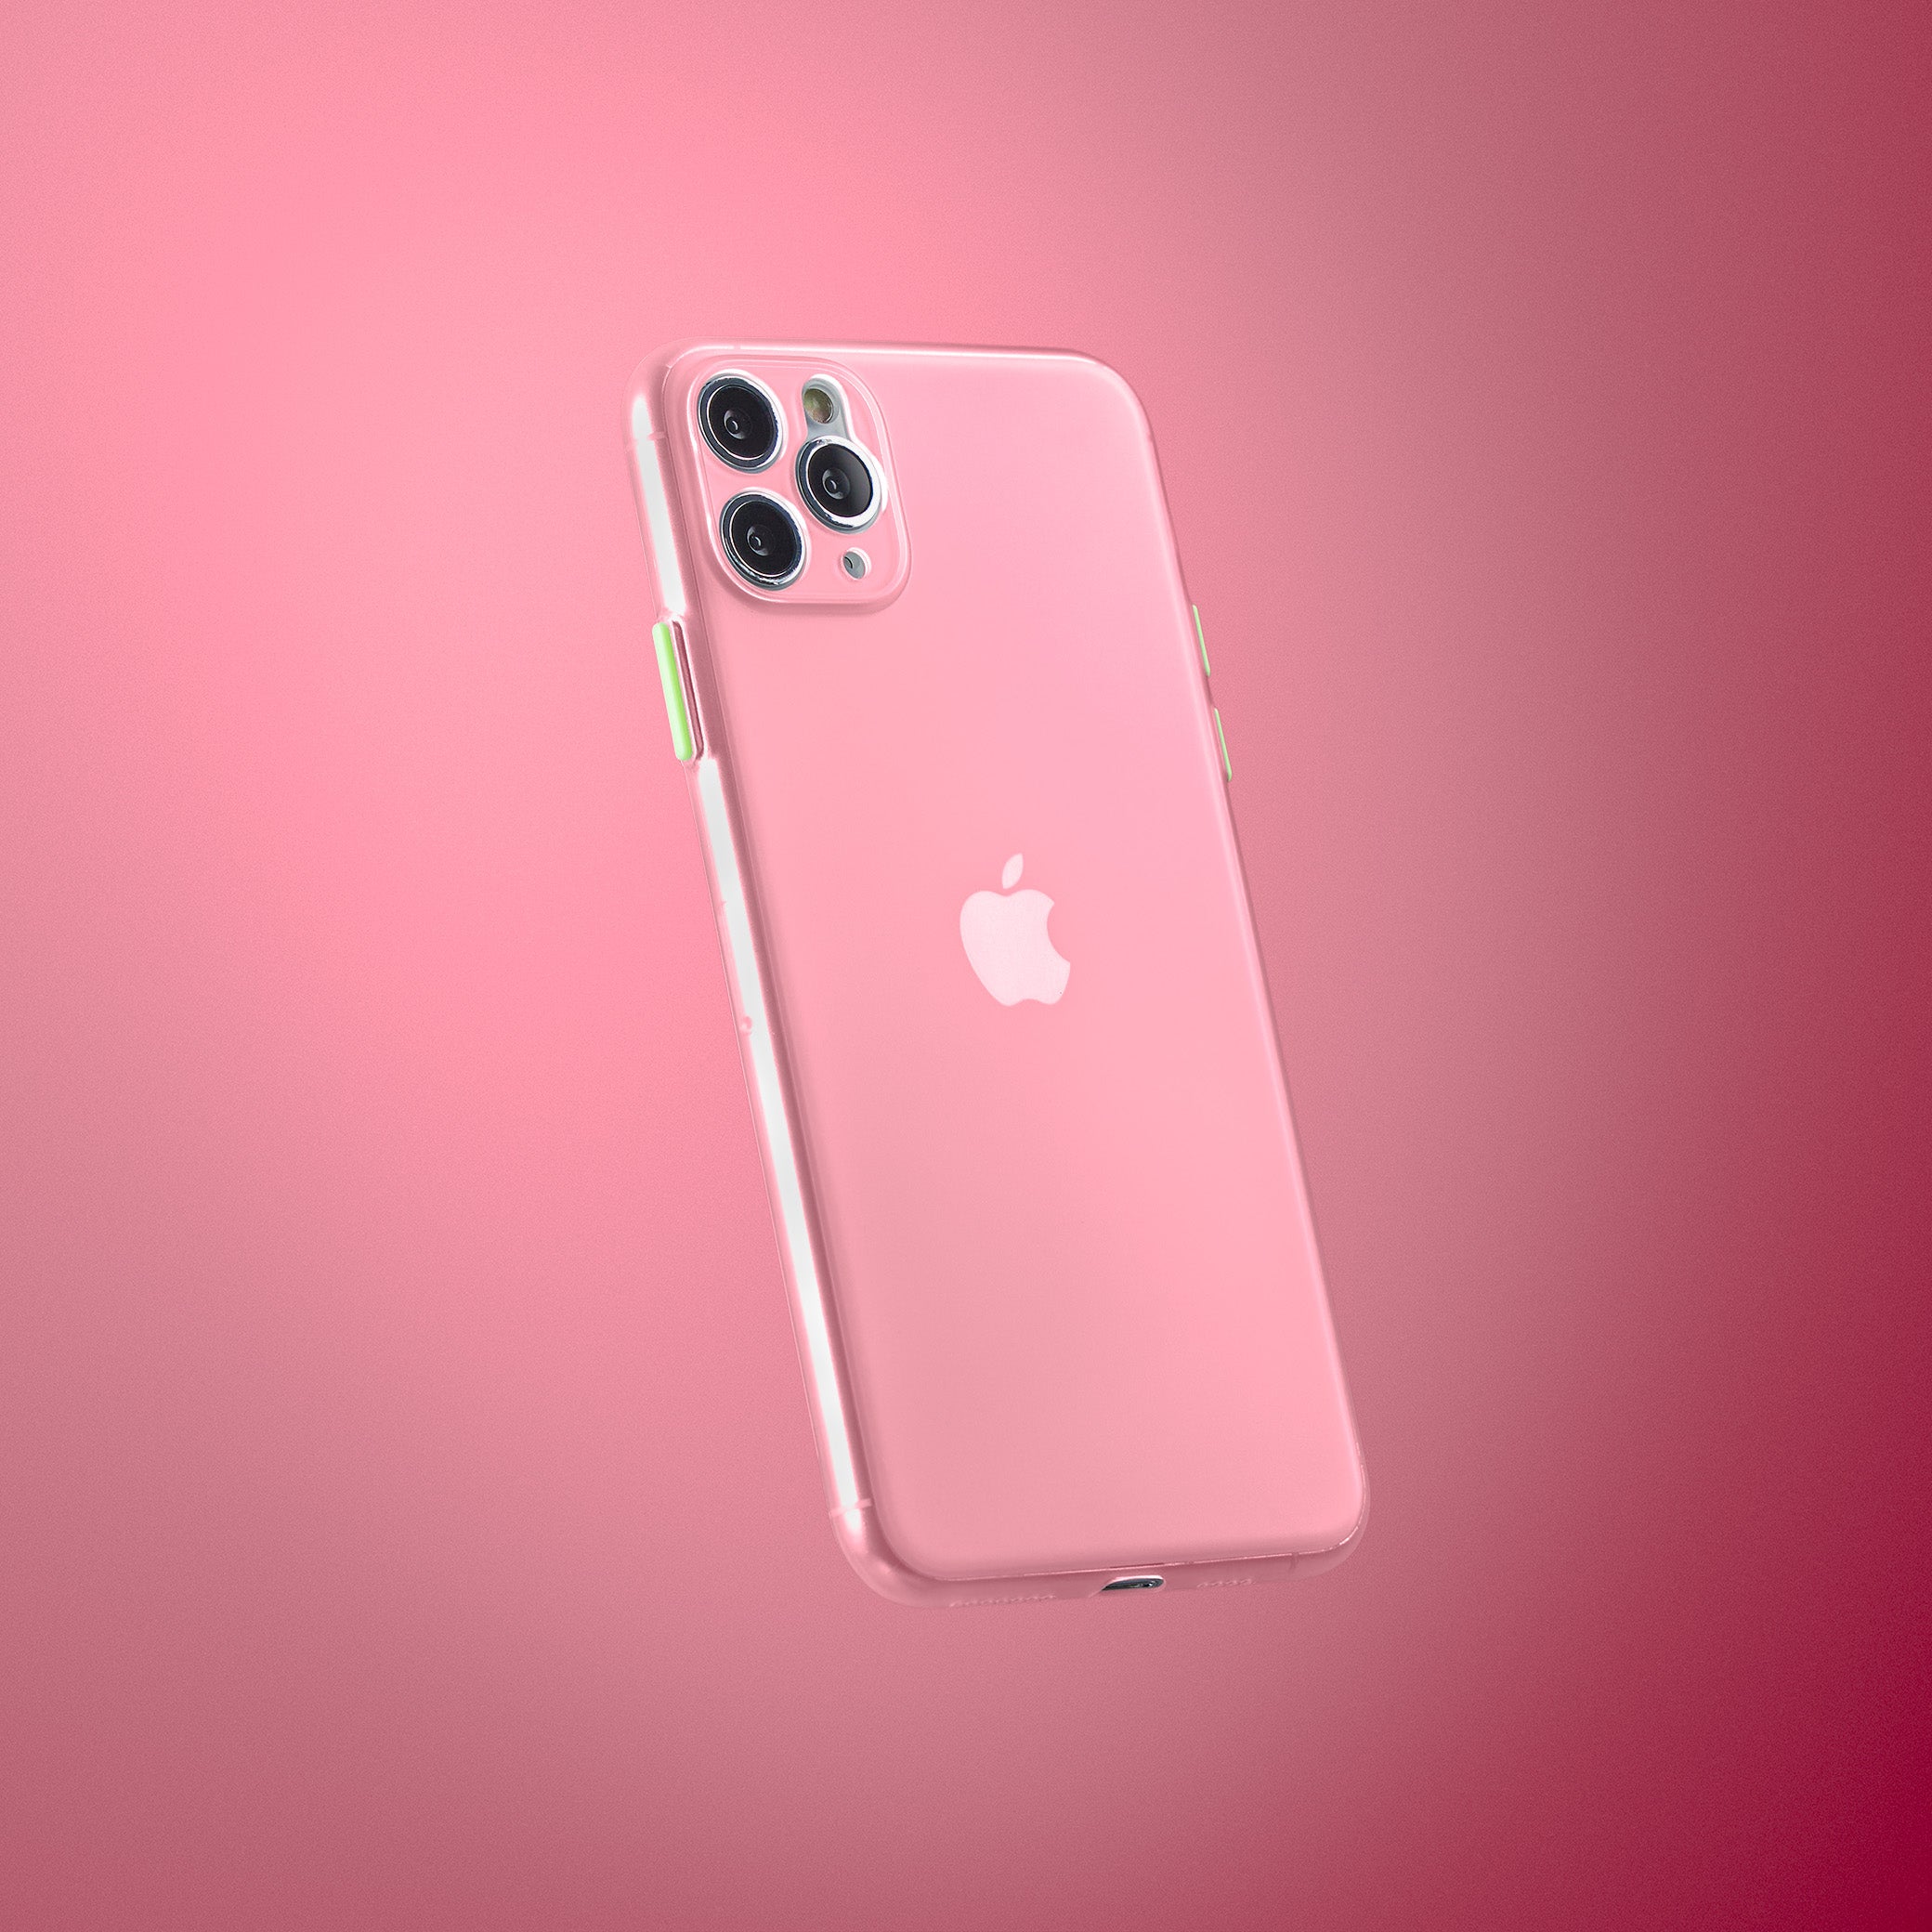 Super Slim Case 2.0 for iPhone 11 Pro Max - Pink Cotton Candy